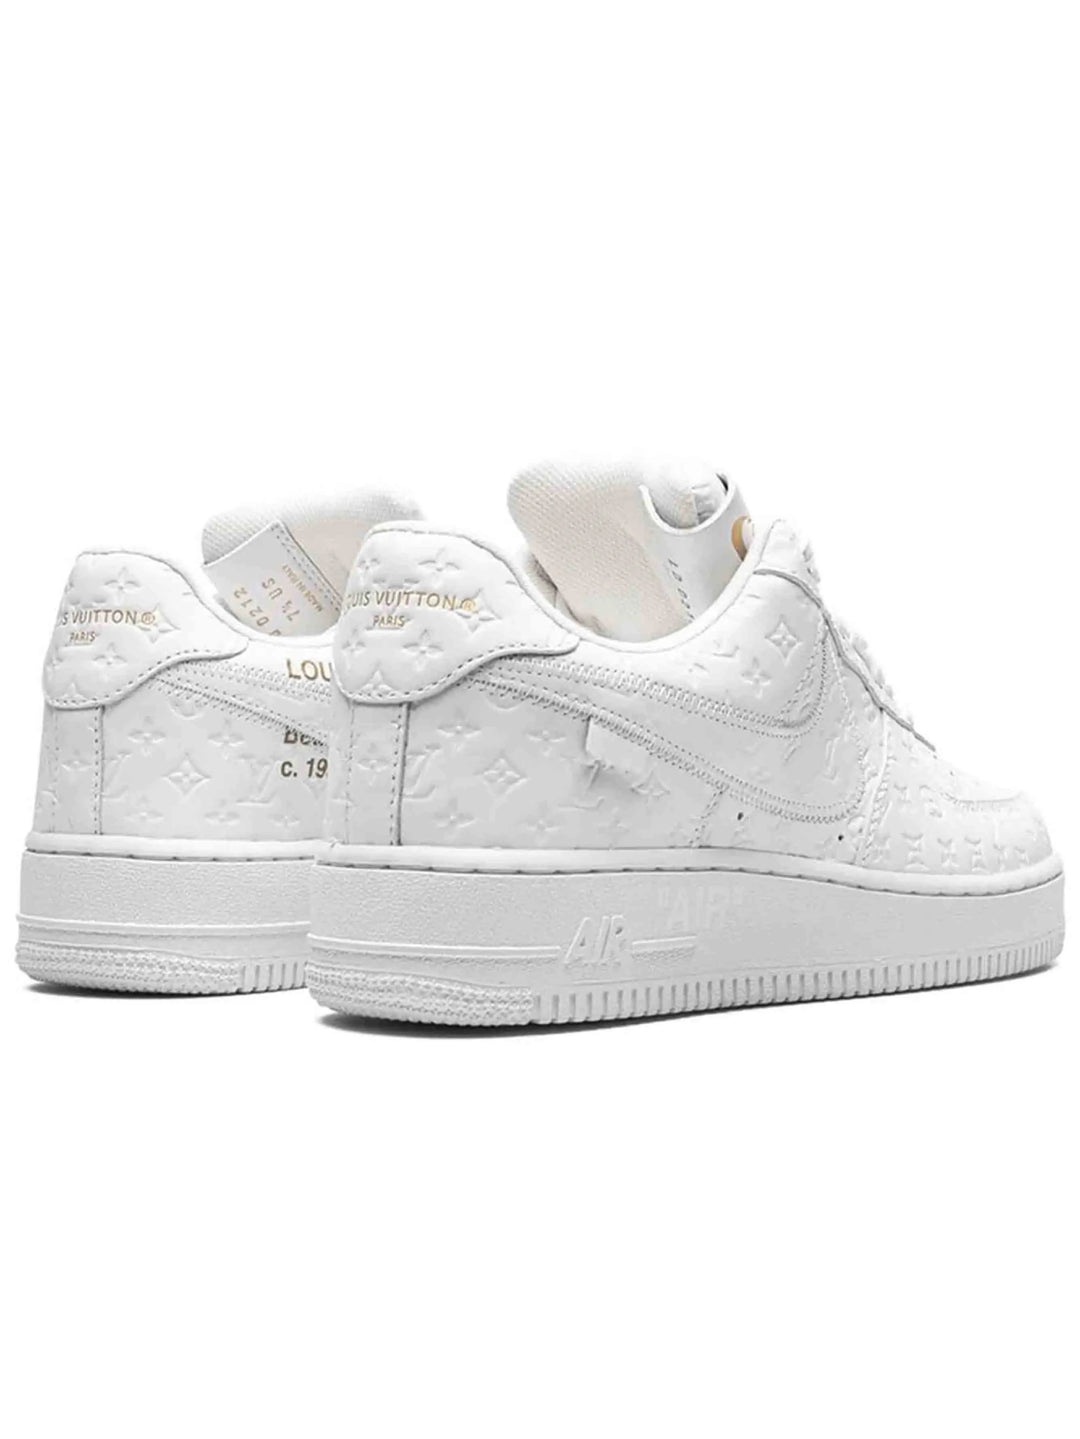 Louis Vuitton Nike Air Force 1 Low By Virgil Abloh White Prior